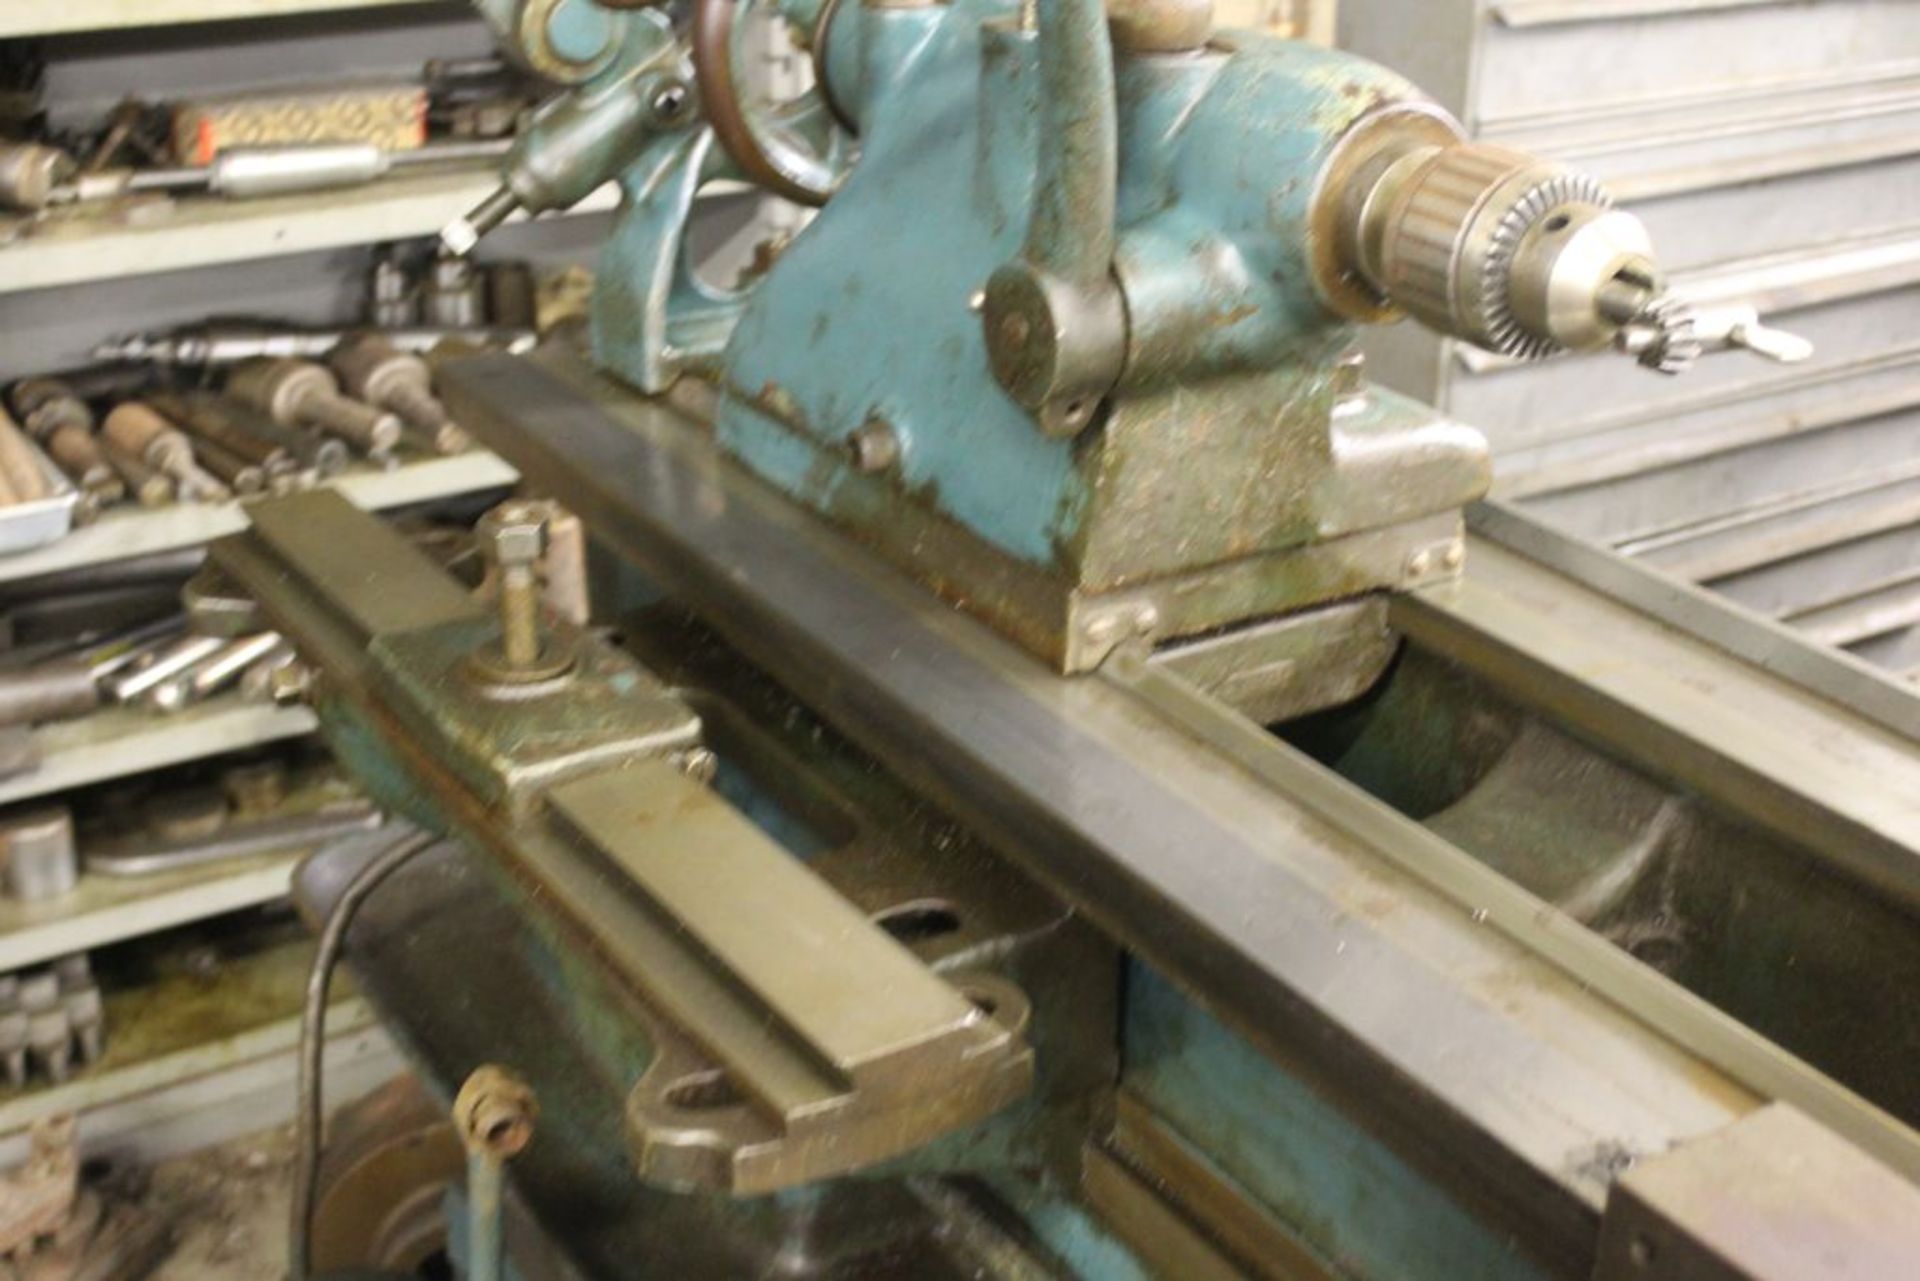 Springfield lathe, sn 52071, 14", 1 3/4" hole, 16" swing, 48" center to center, taper attachment, - Image 10 of 14